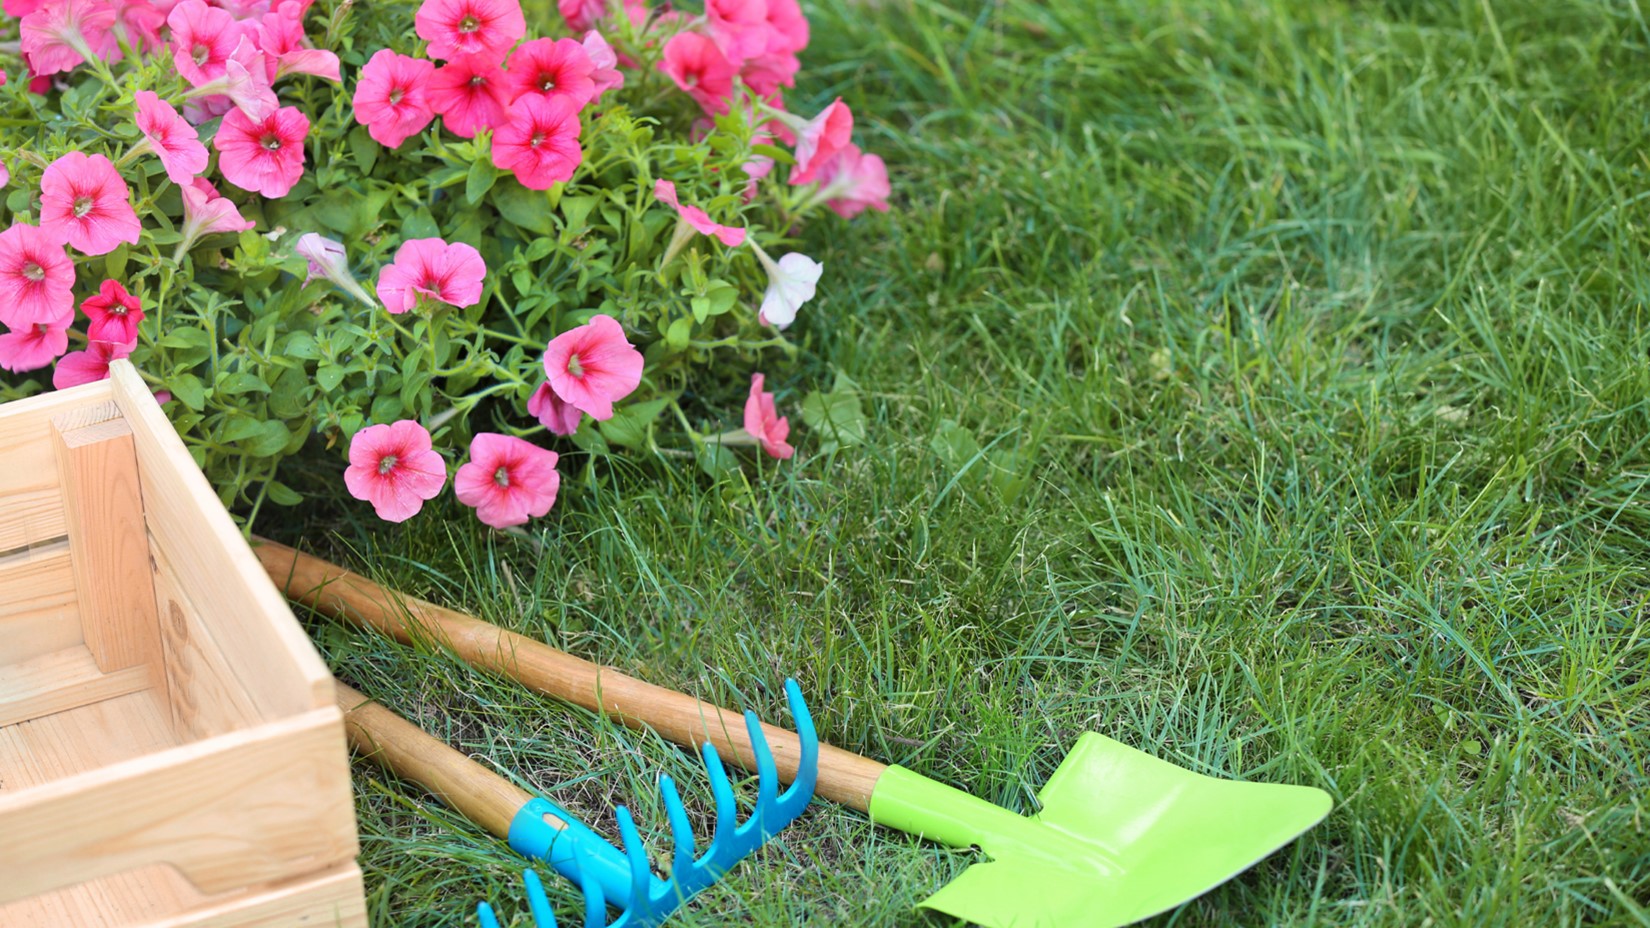 Overland Park Lawn Care Company